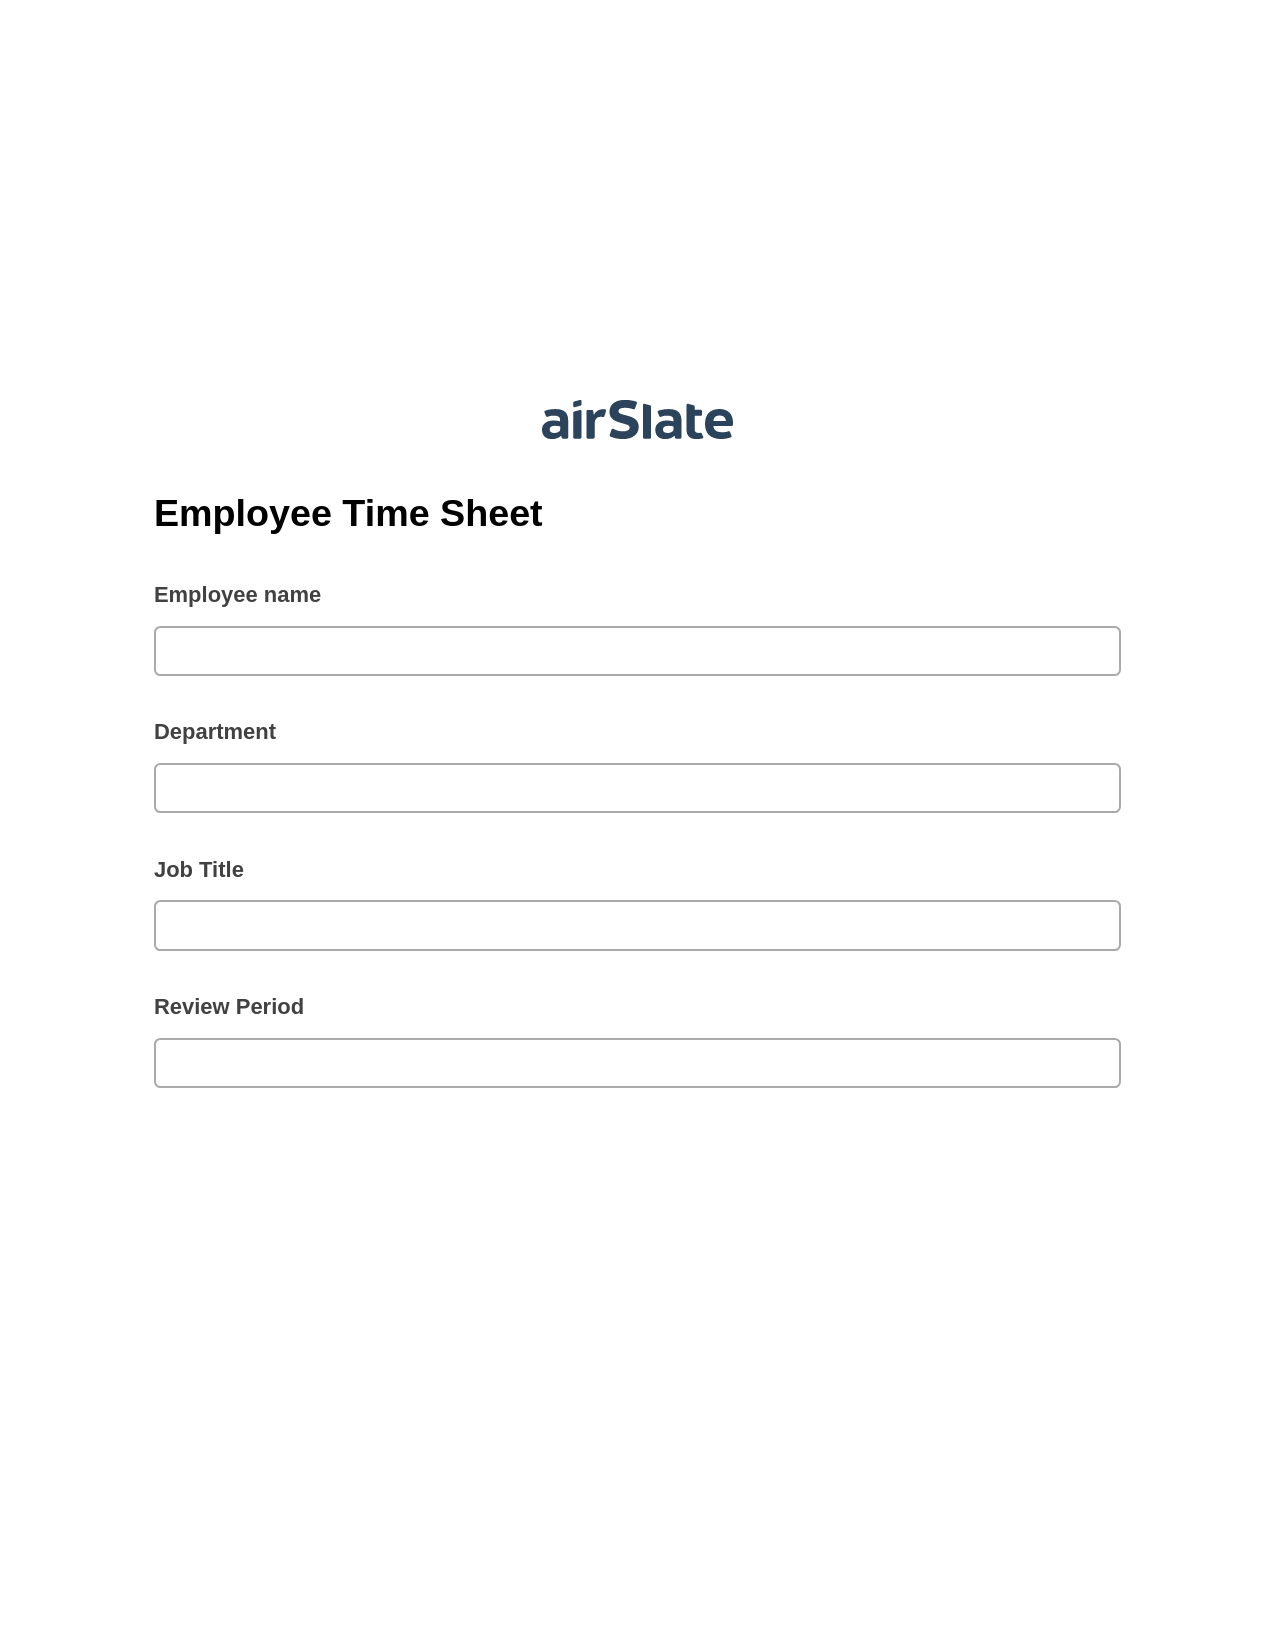 Employee Time Sheet Prefill from NetSuite records, Update Audit Trail Bot, Archive to Google Drive Bot